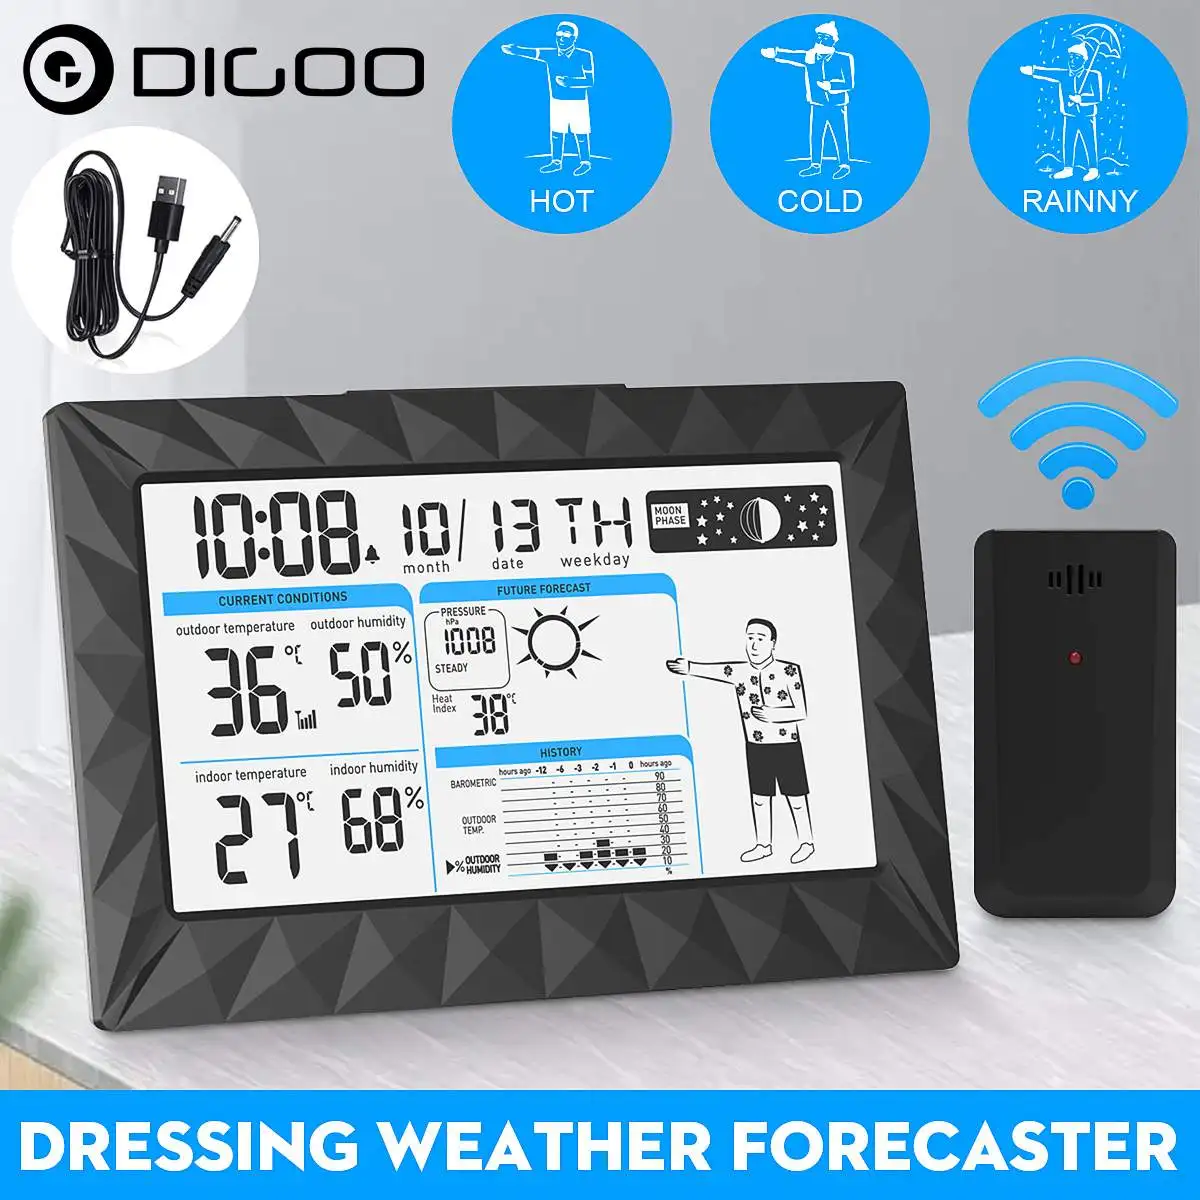 

DIGOO LCD Weather Station Outdoor Indoor Thermometer Humidity Forecast Barometer Snooze Alarm Clock Sunrise Sunset Calendar